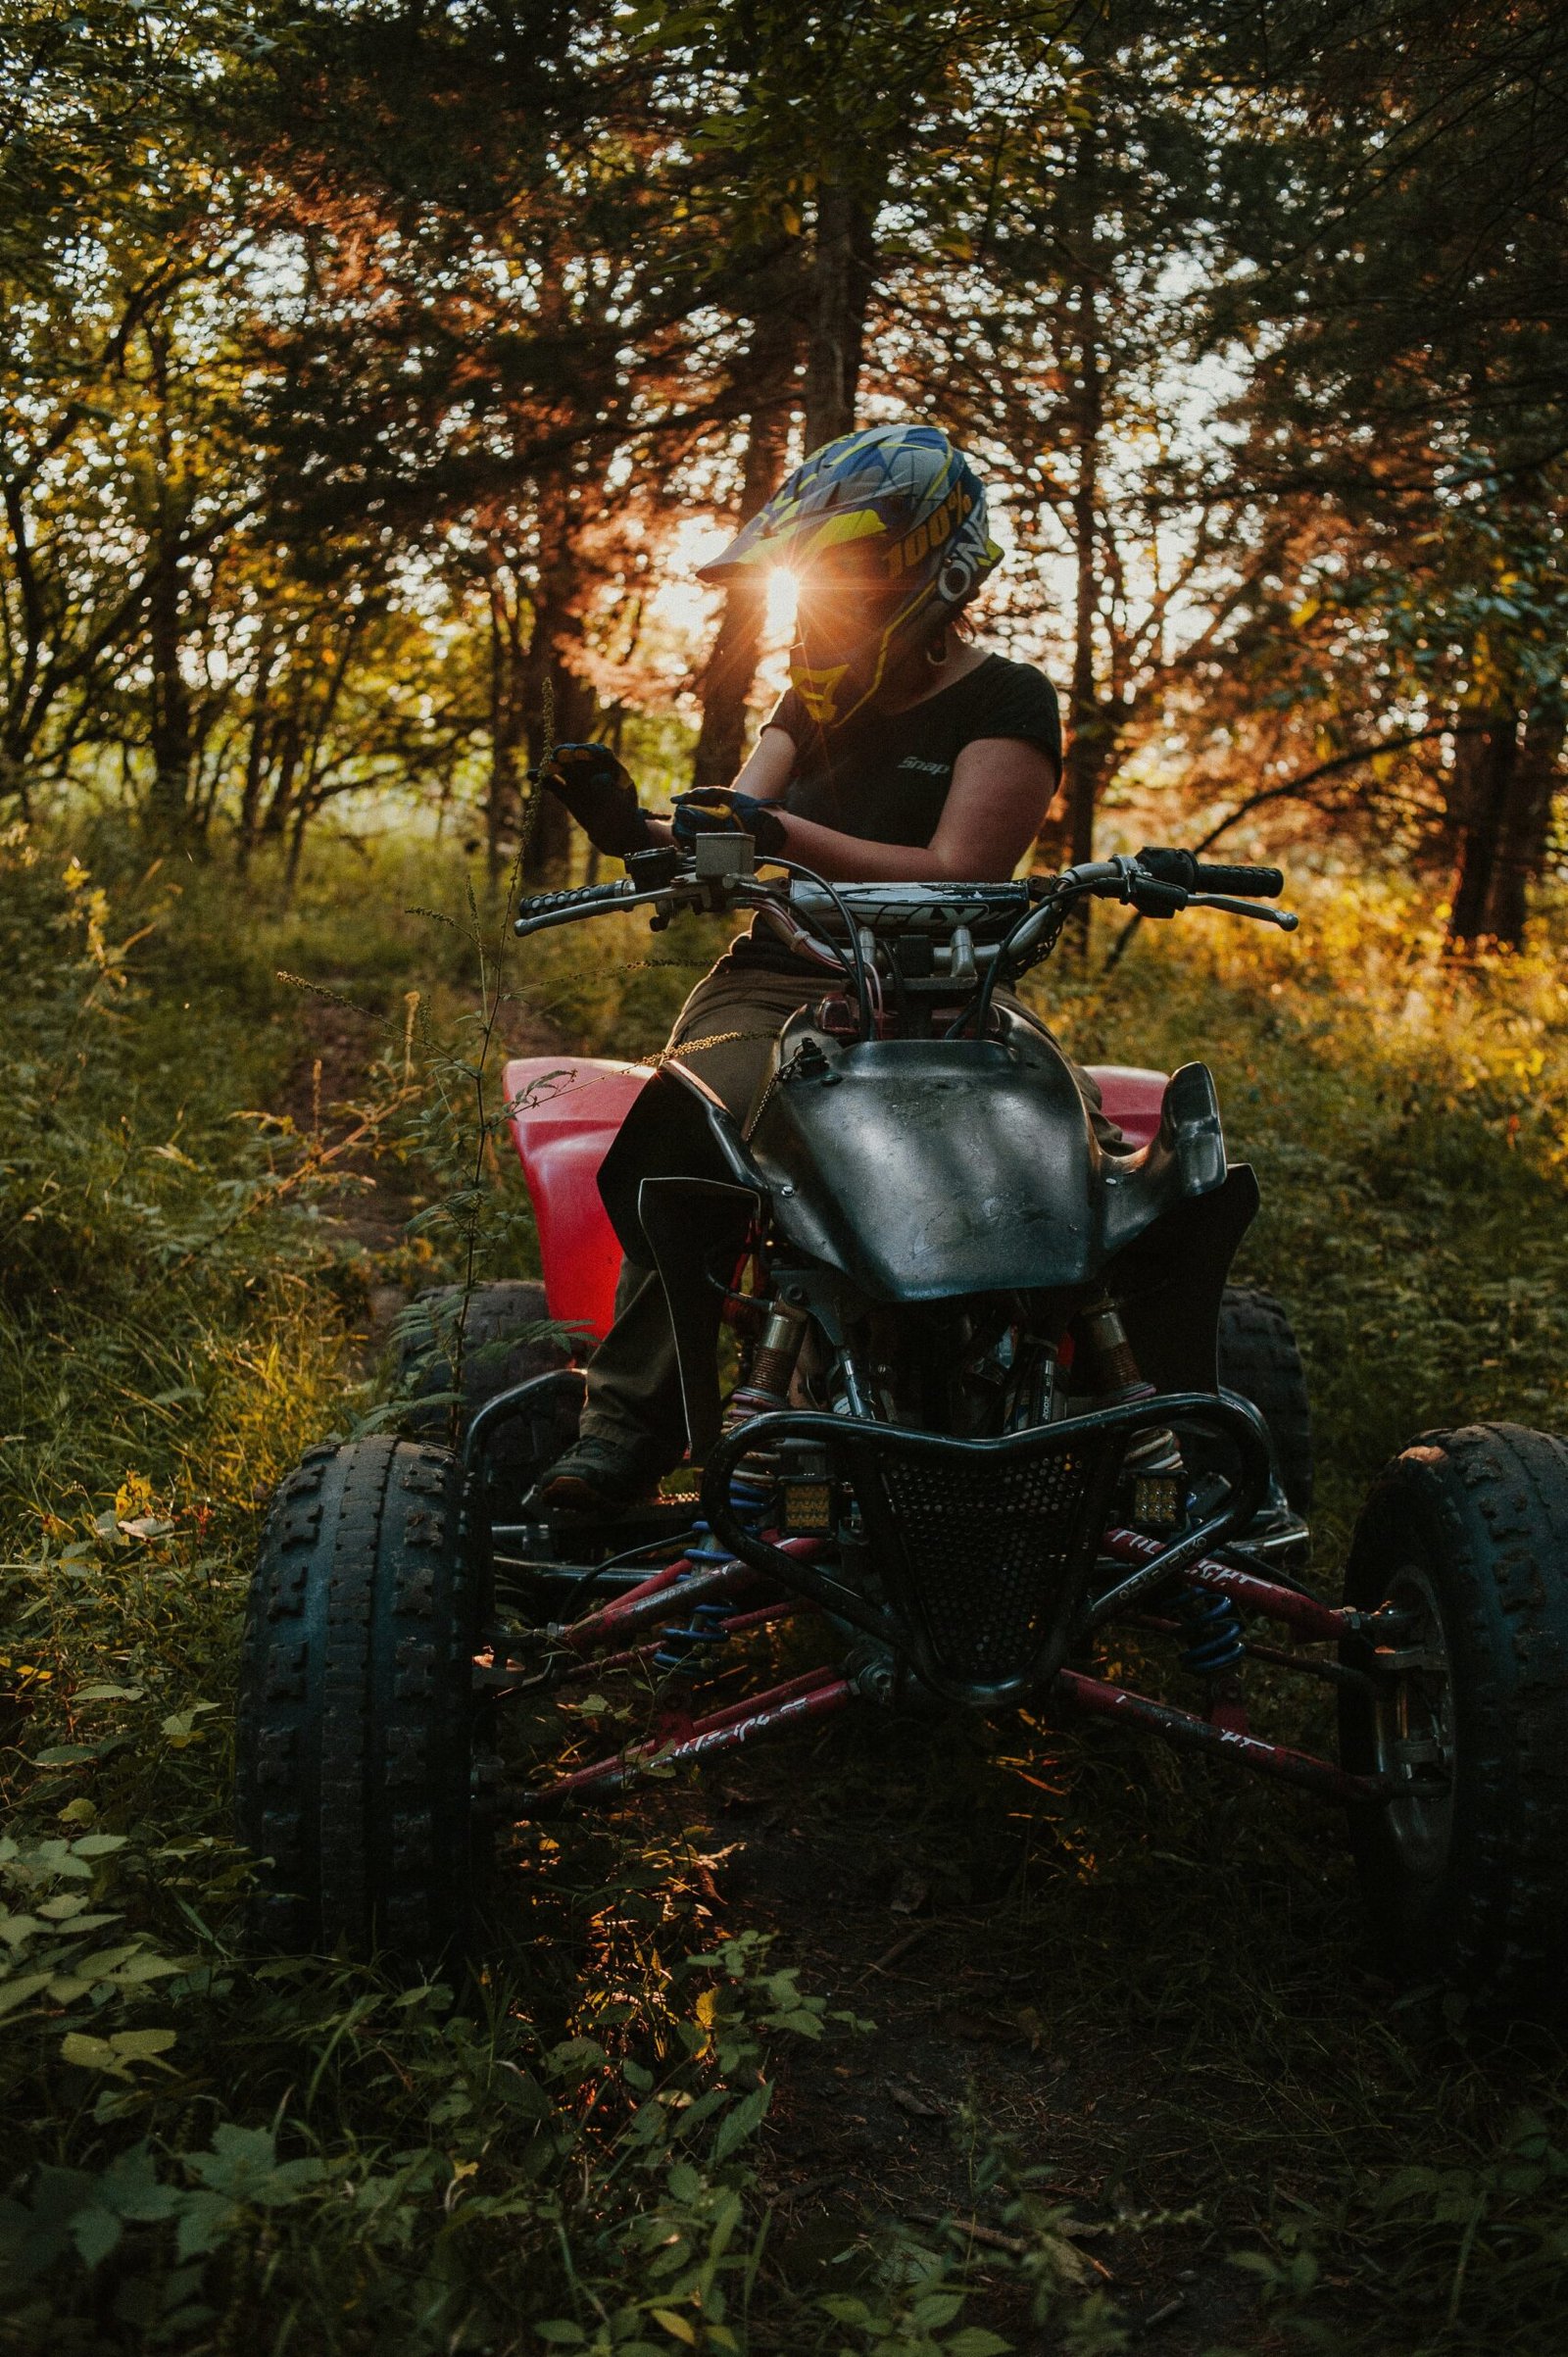 Discovering the Adventure: ATV Trails for Novices